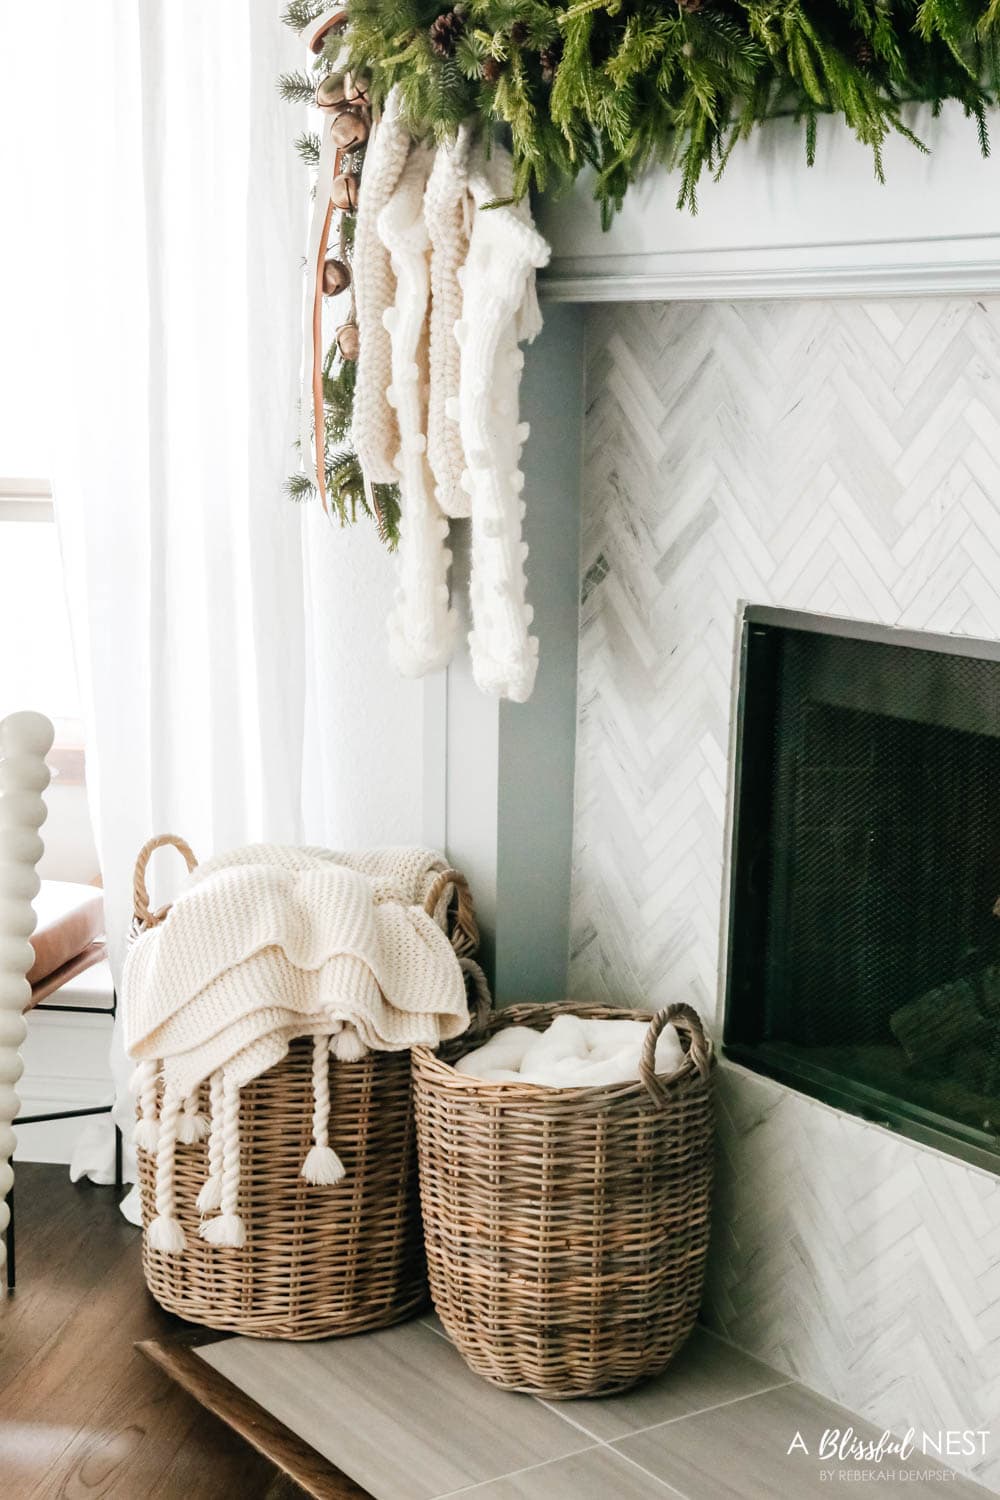 Baskets next to a fireplace filled with blankets